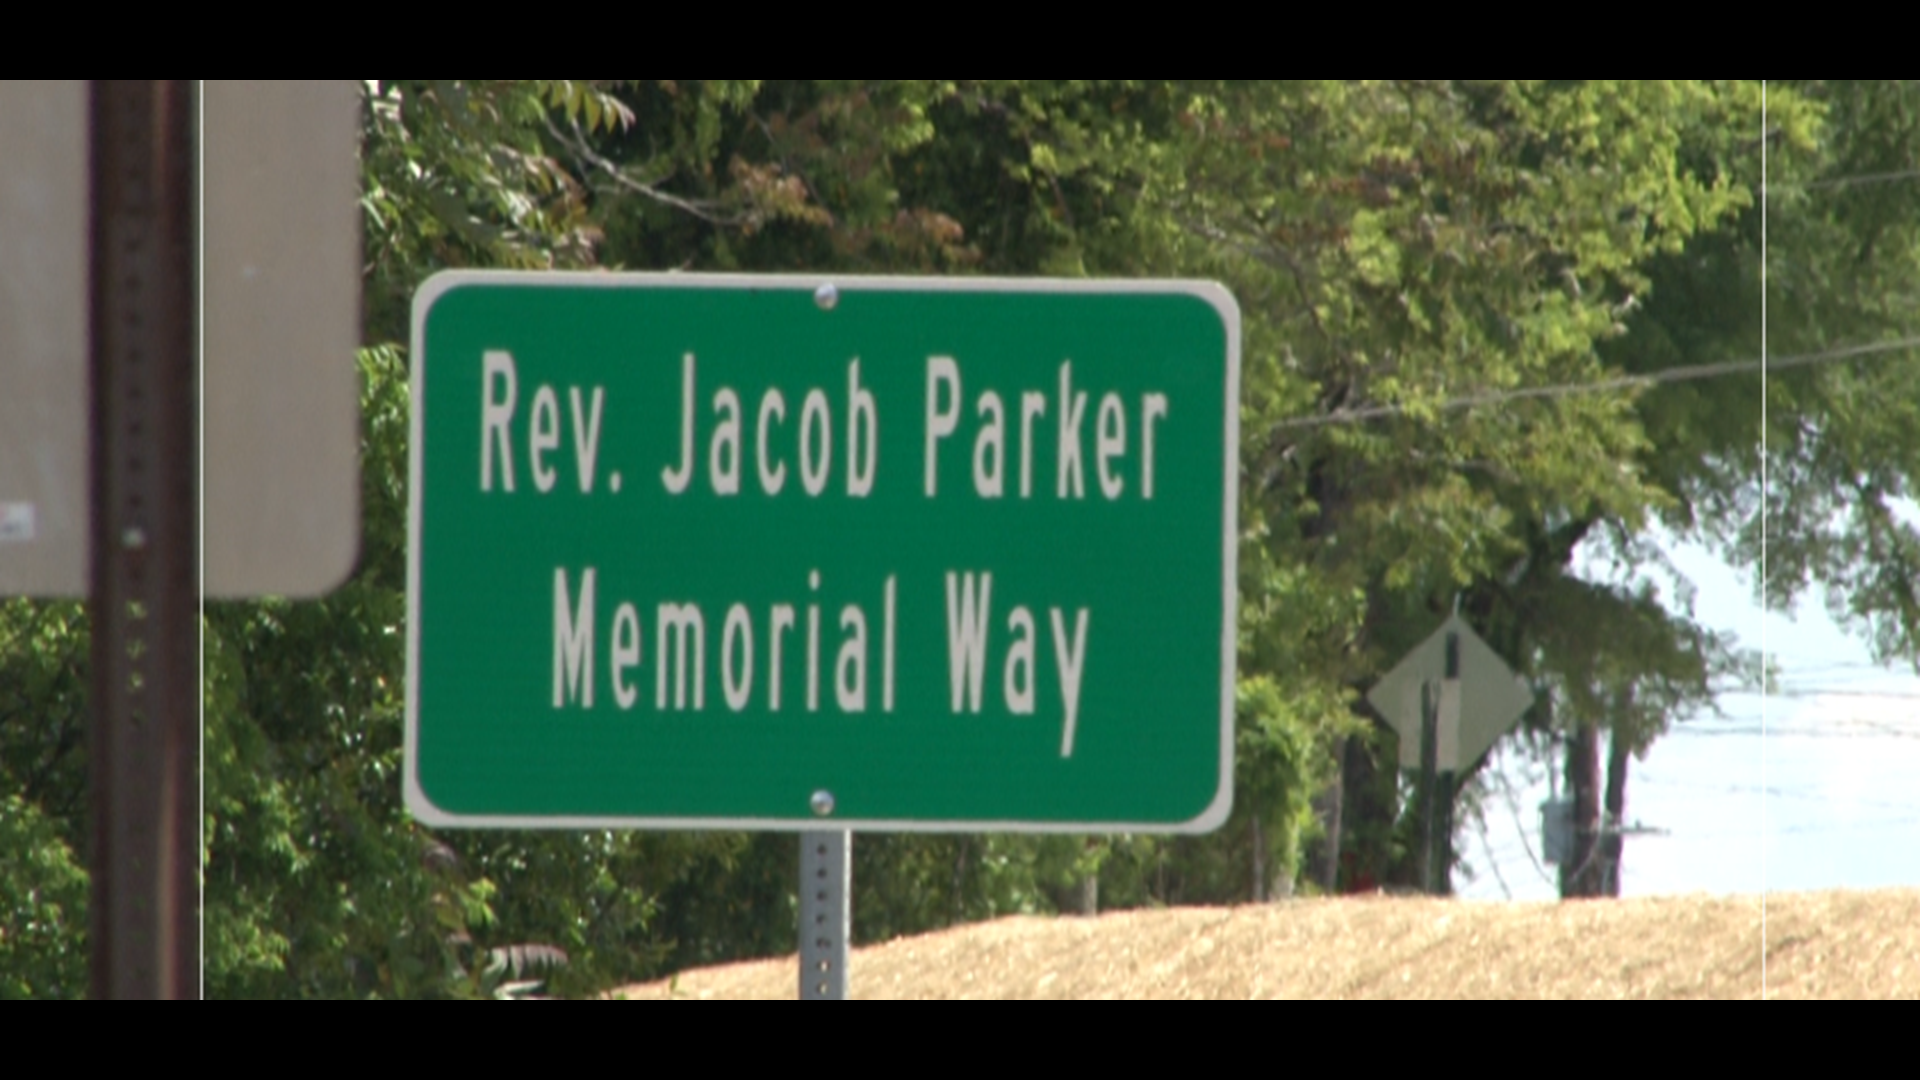 Reverend Jacob Parker was recognized for his 49 years of service in the community and for being a beacon of light to Ebenezer Missionary Baptist Church.